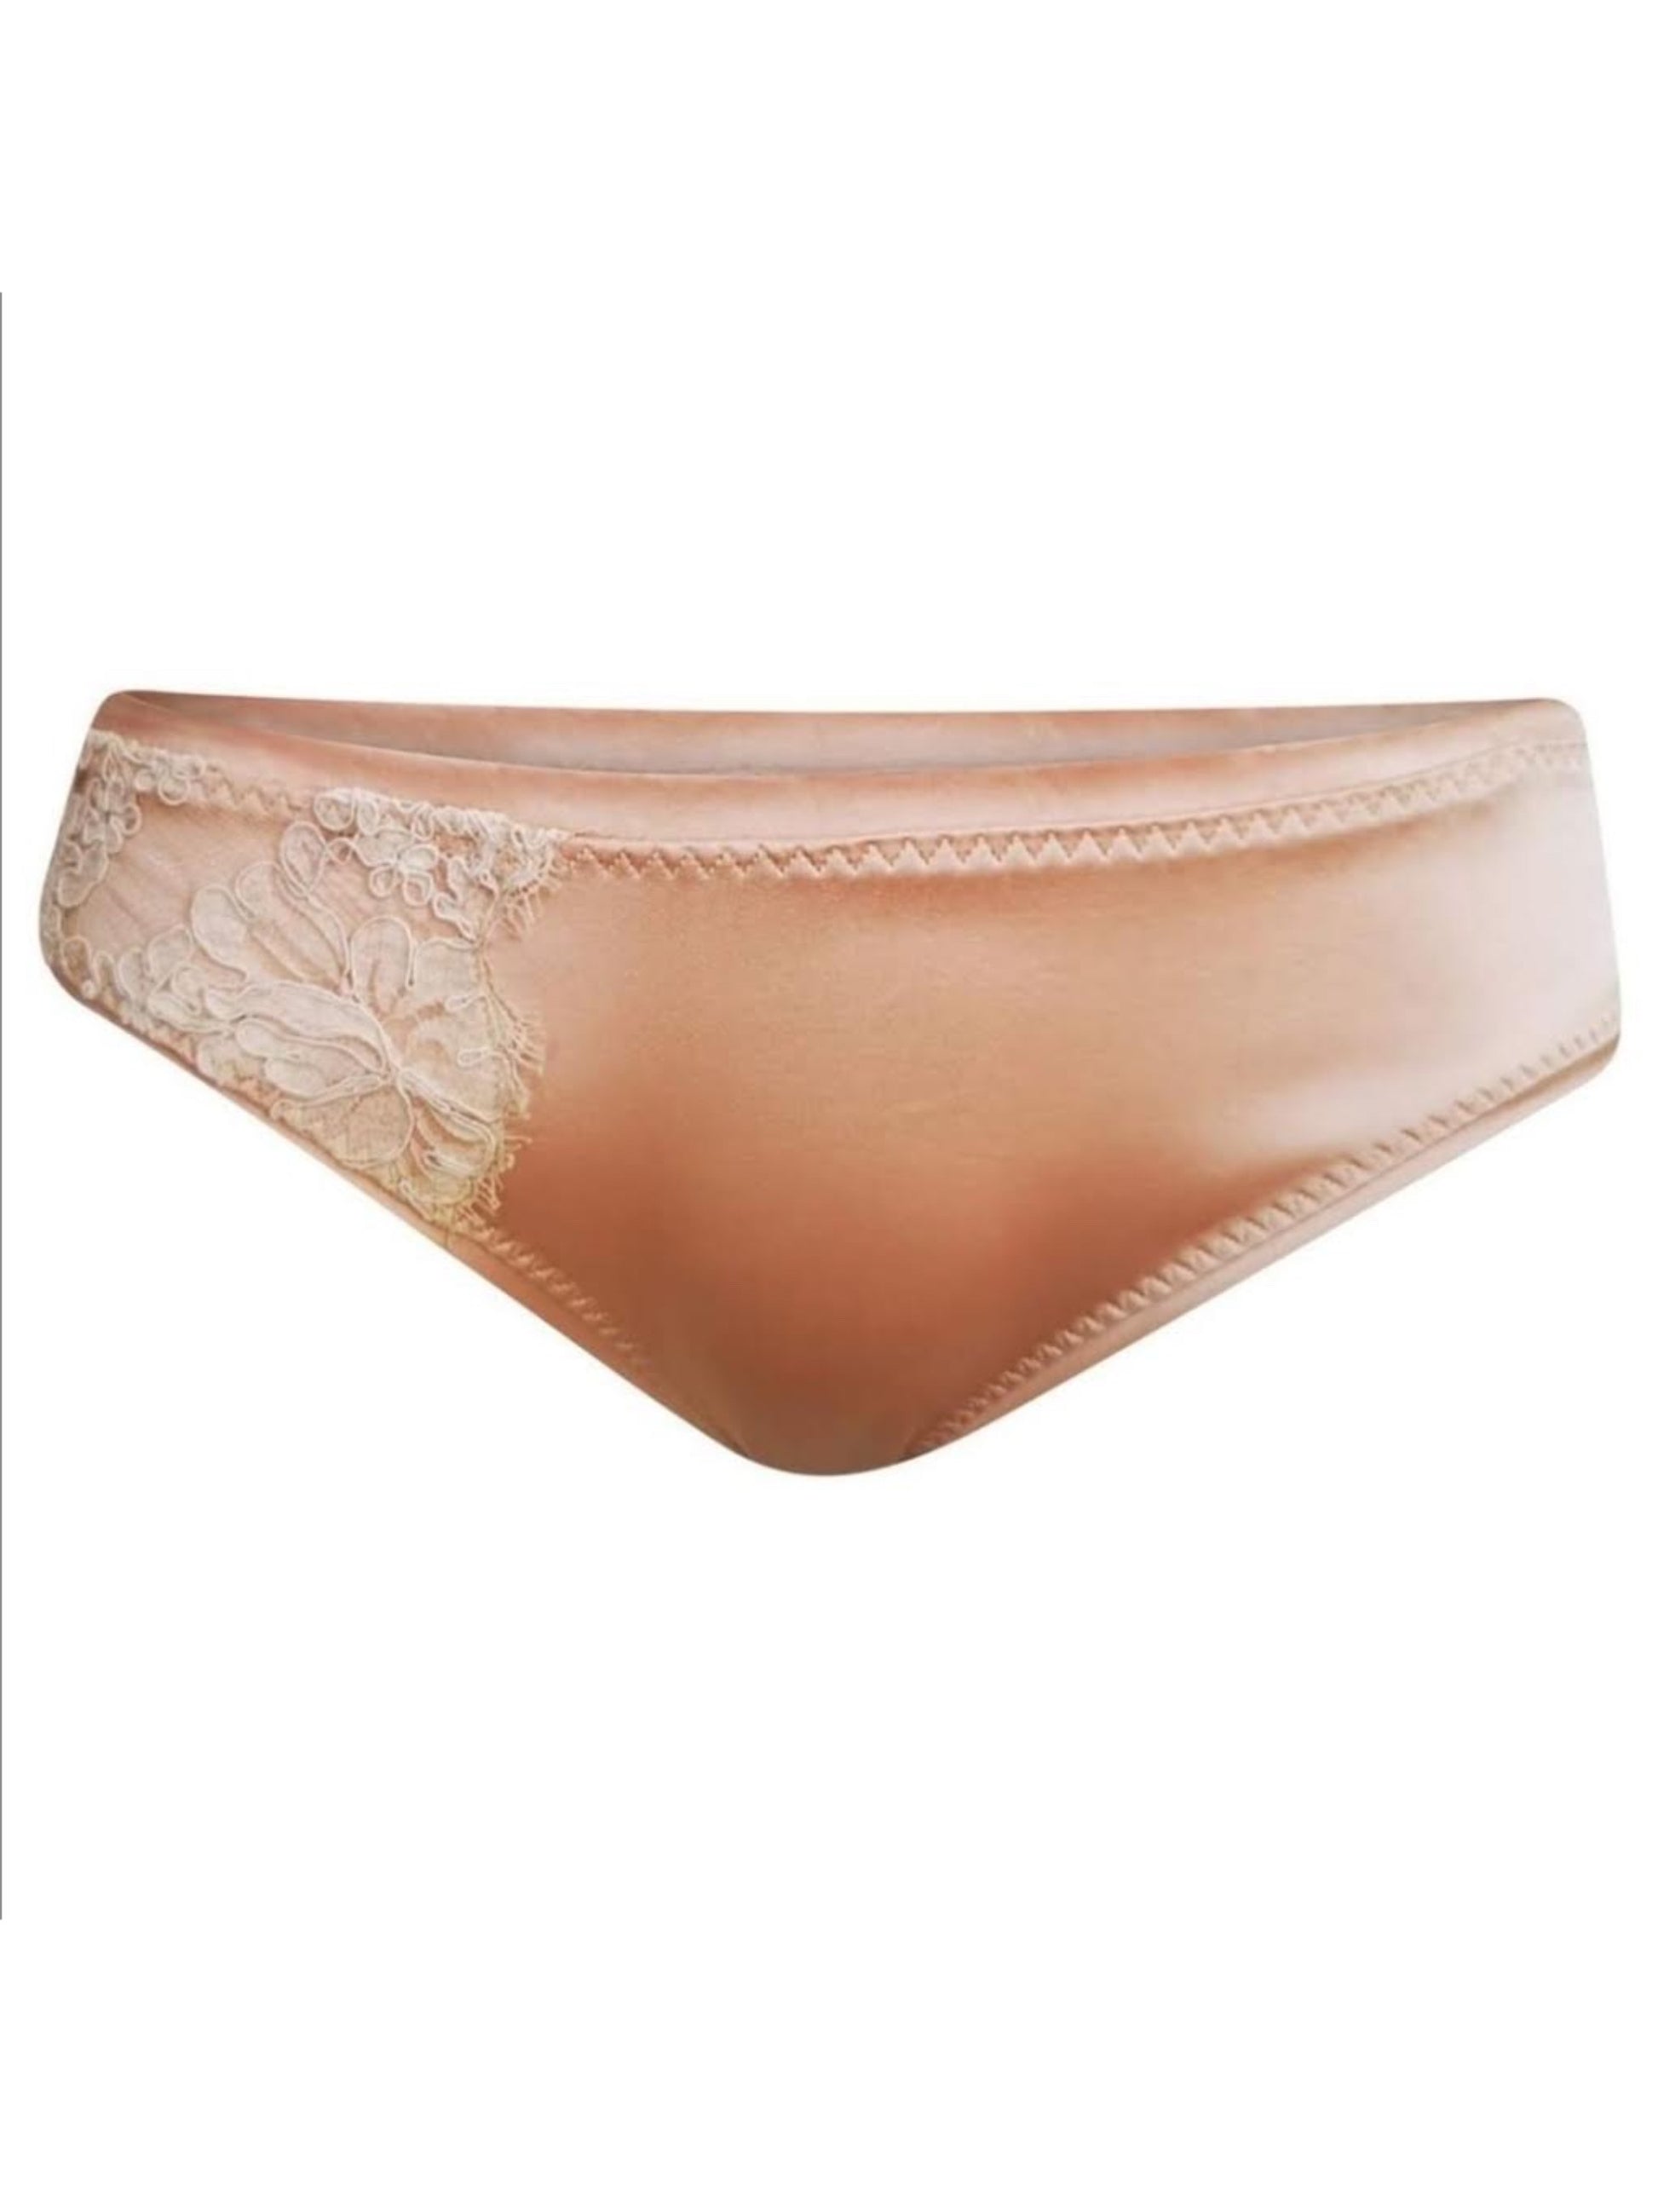 SILK UNDERWEAR IN TAN COLOUR WITH FRENCH LACE DETAIL